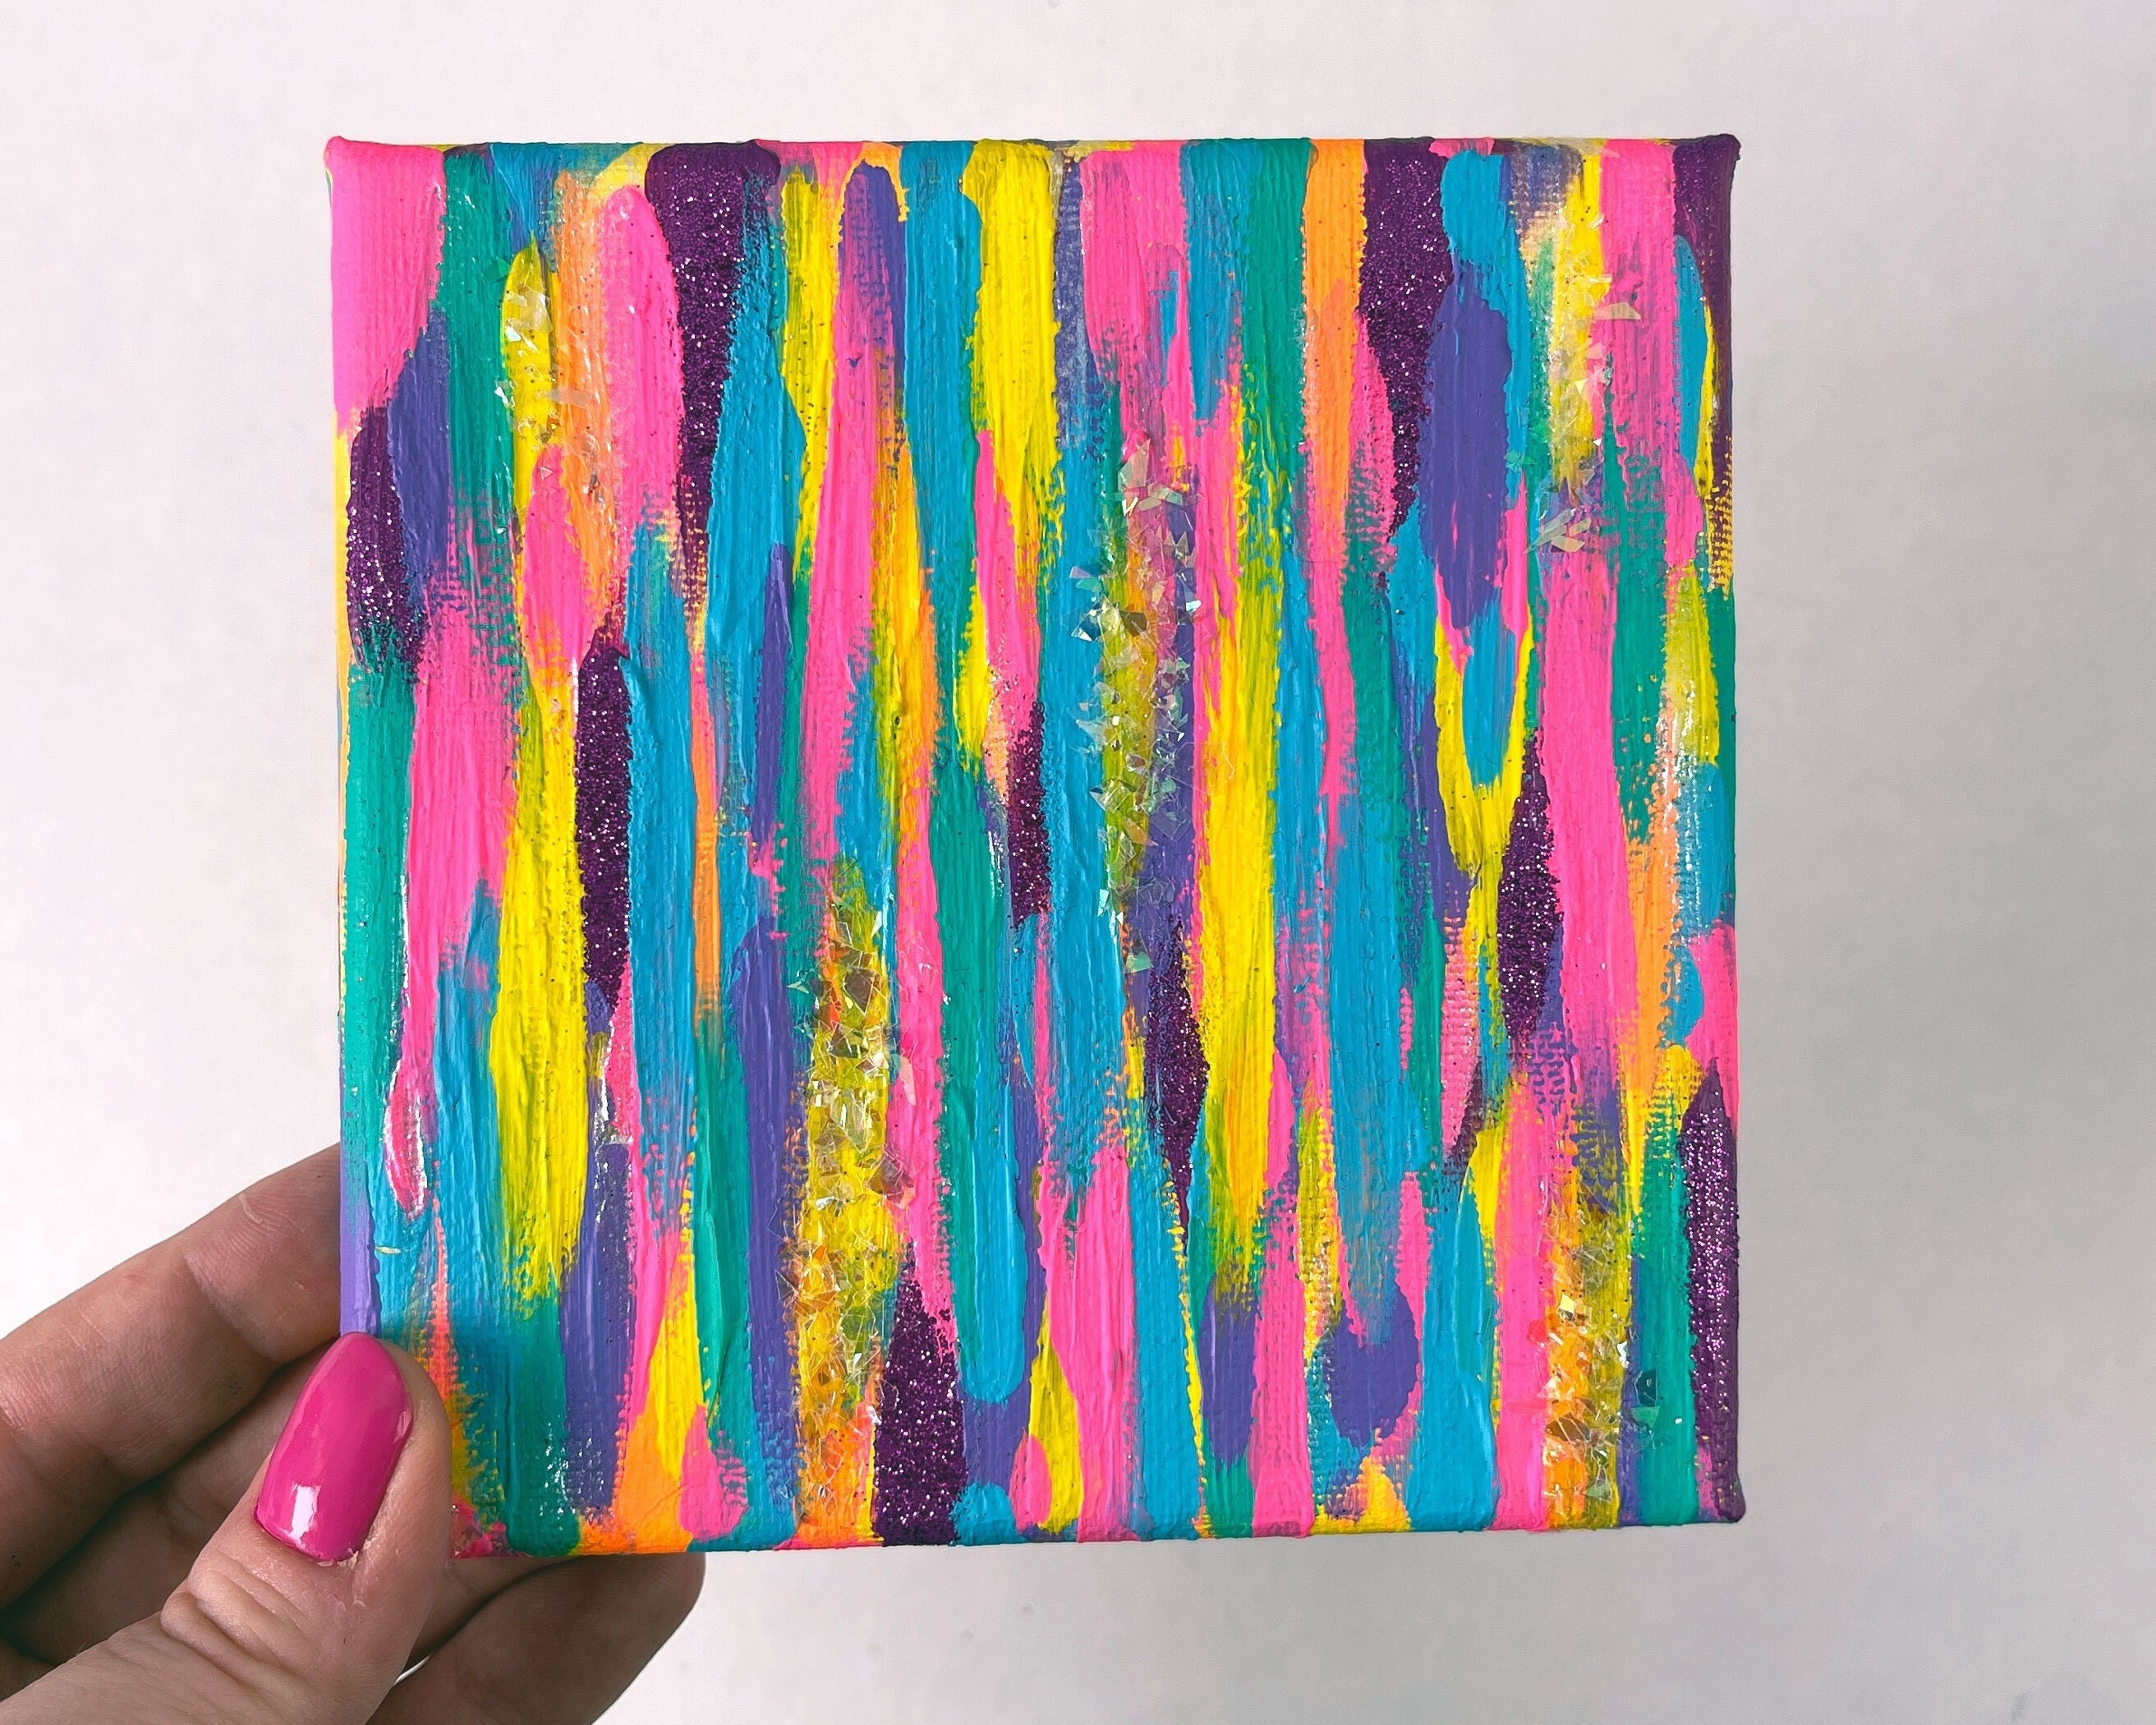 Abstract iridescent watercolor paint in warm and cool tones on